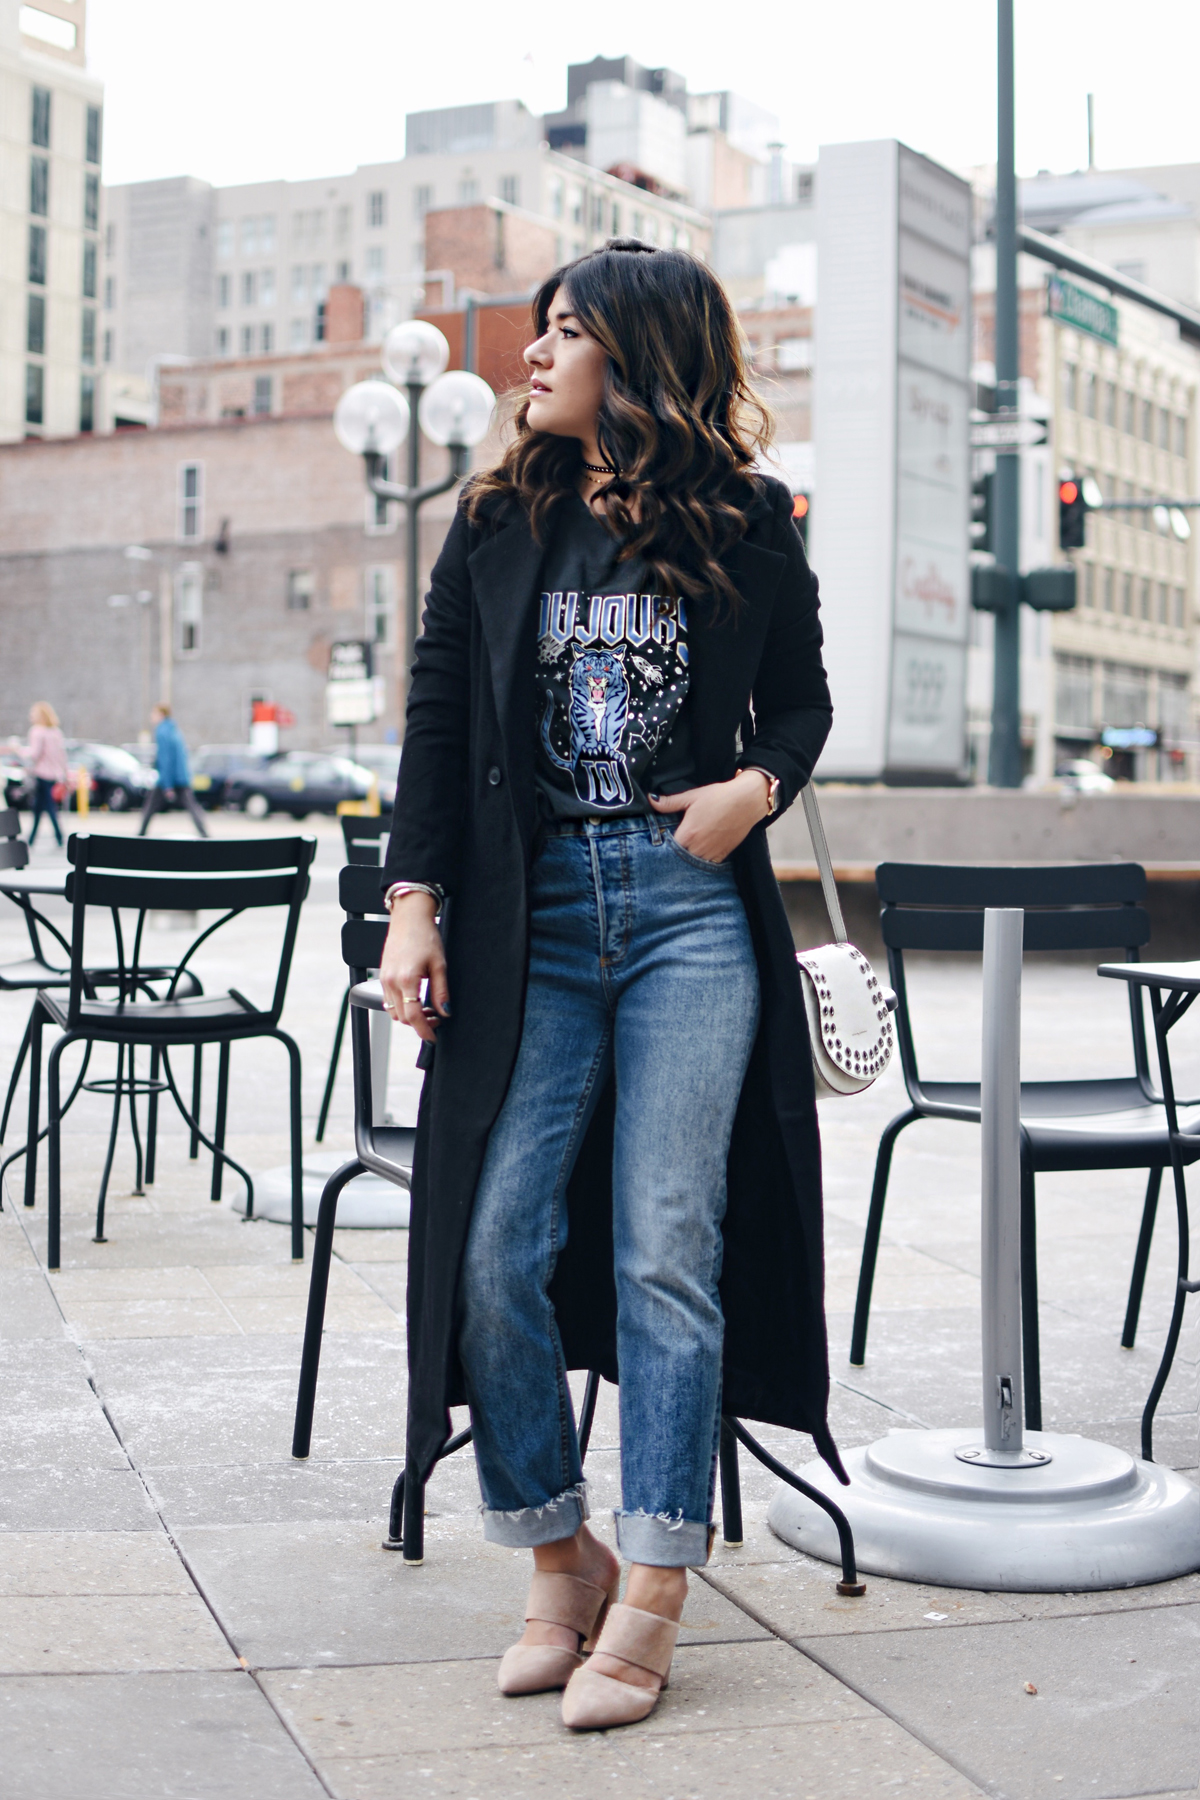 Carolina Hellal of Chic Talk wearing an H&M graphic t-shirt, H&m girlfriend jeans, Frey company white crossbody bag, and NA-KD fashion mules and black coat. - HOW TO STYLE GIRLFRIEND JEANS by popular Denver fashion blogger Chic Talk